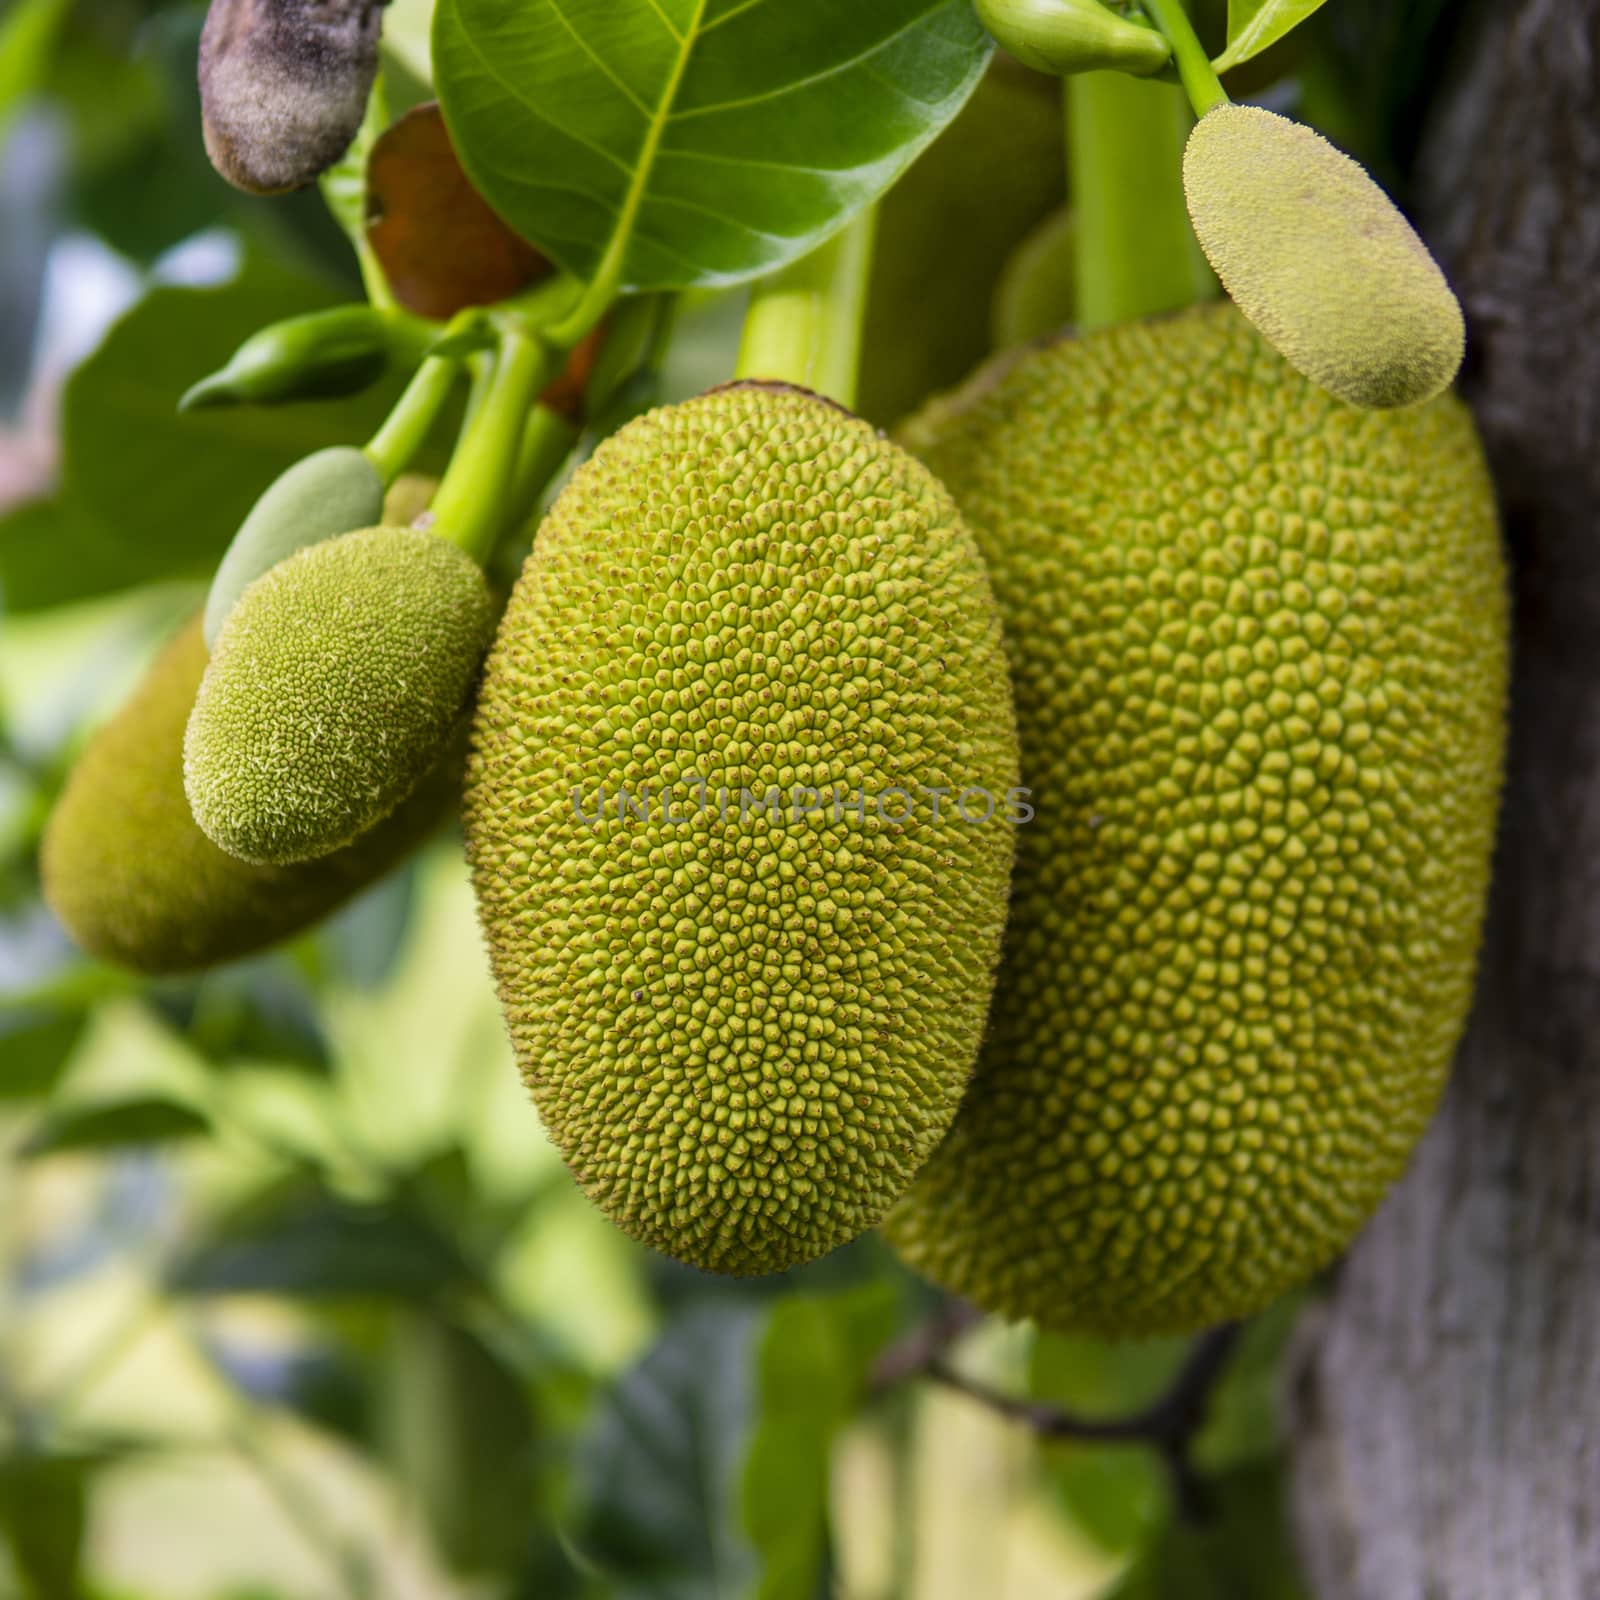 Ripe Jack fruit or Kanun hanging from a branch of a tree. Close up of jackfruit in the garden.